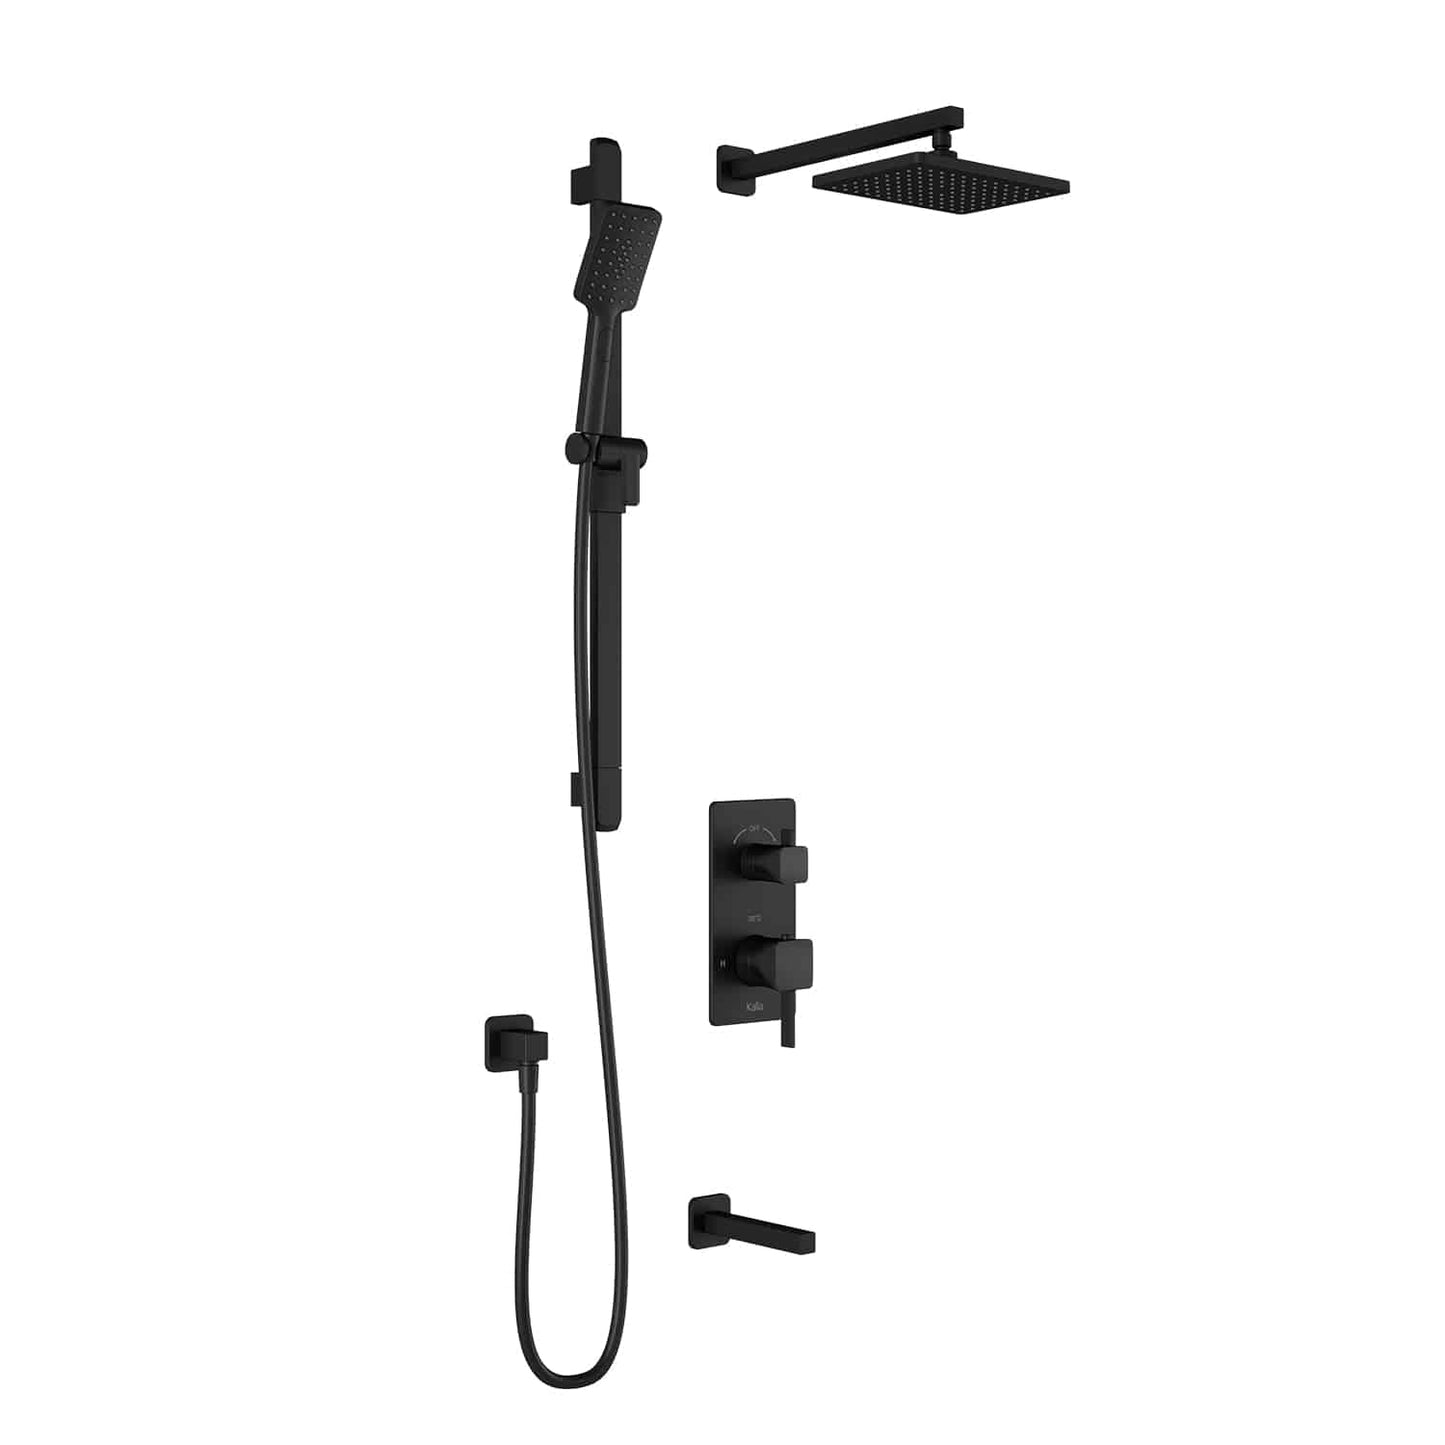 KALIA SquareOne TD3 AQUATONIK T/P with Diverter Shower System with Wall Arm -Matte Black